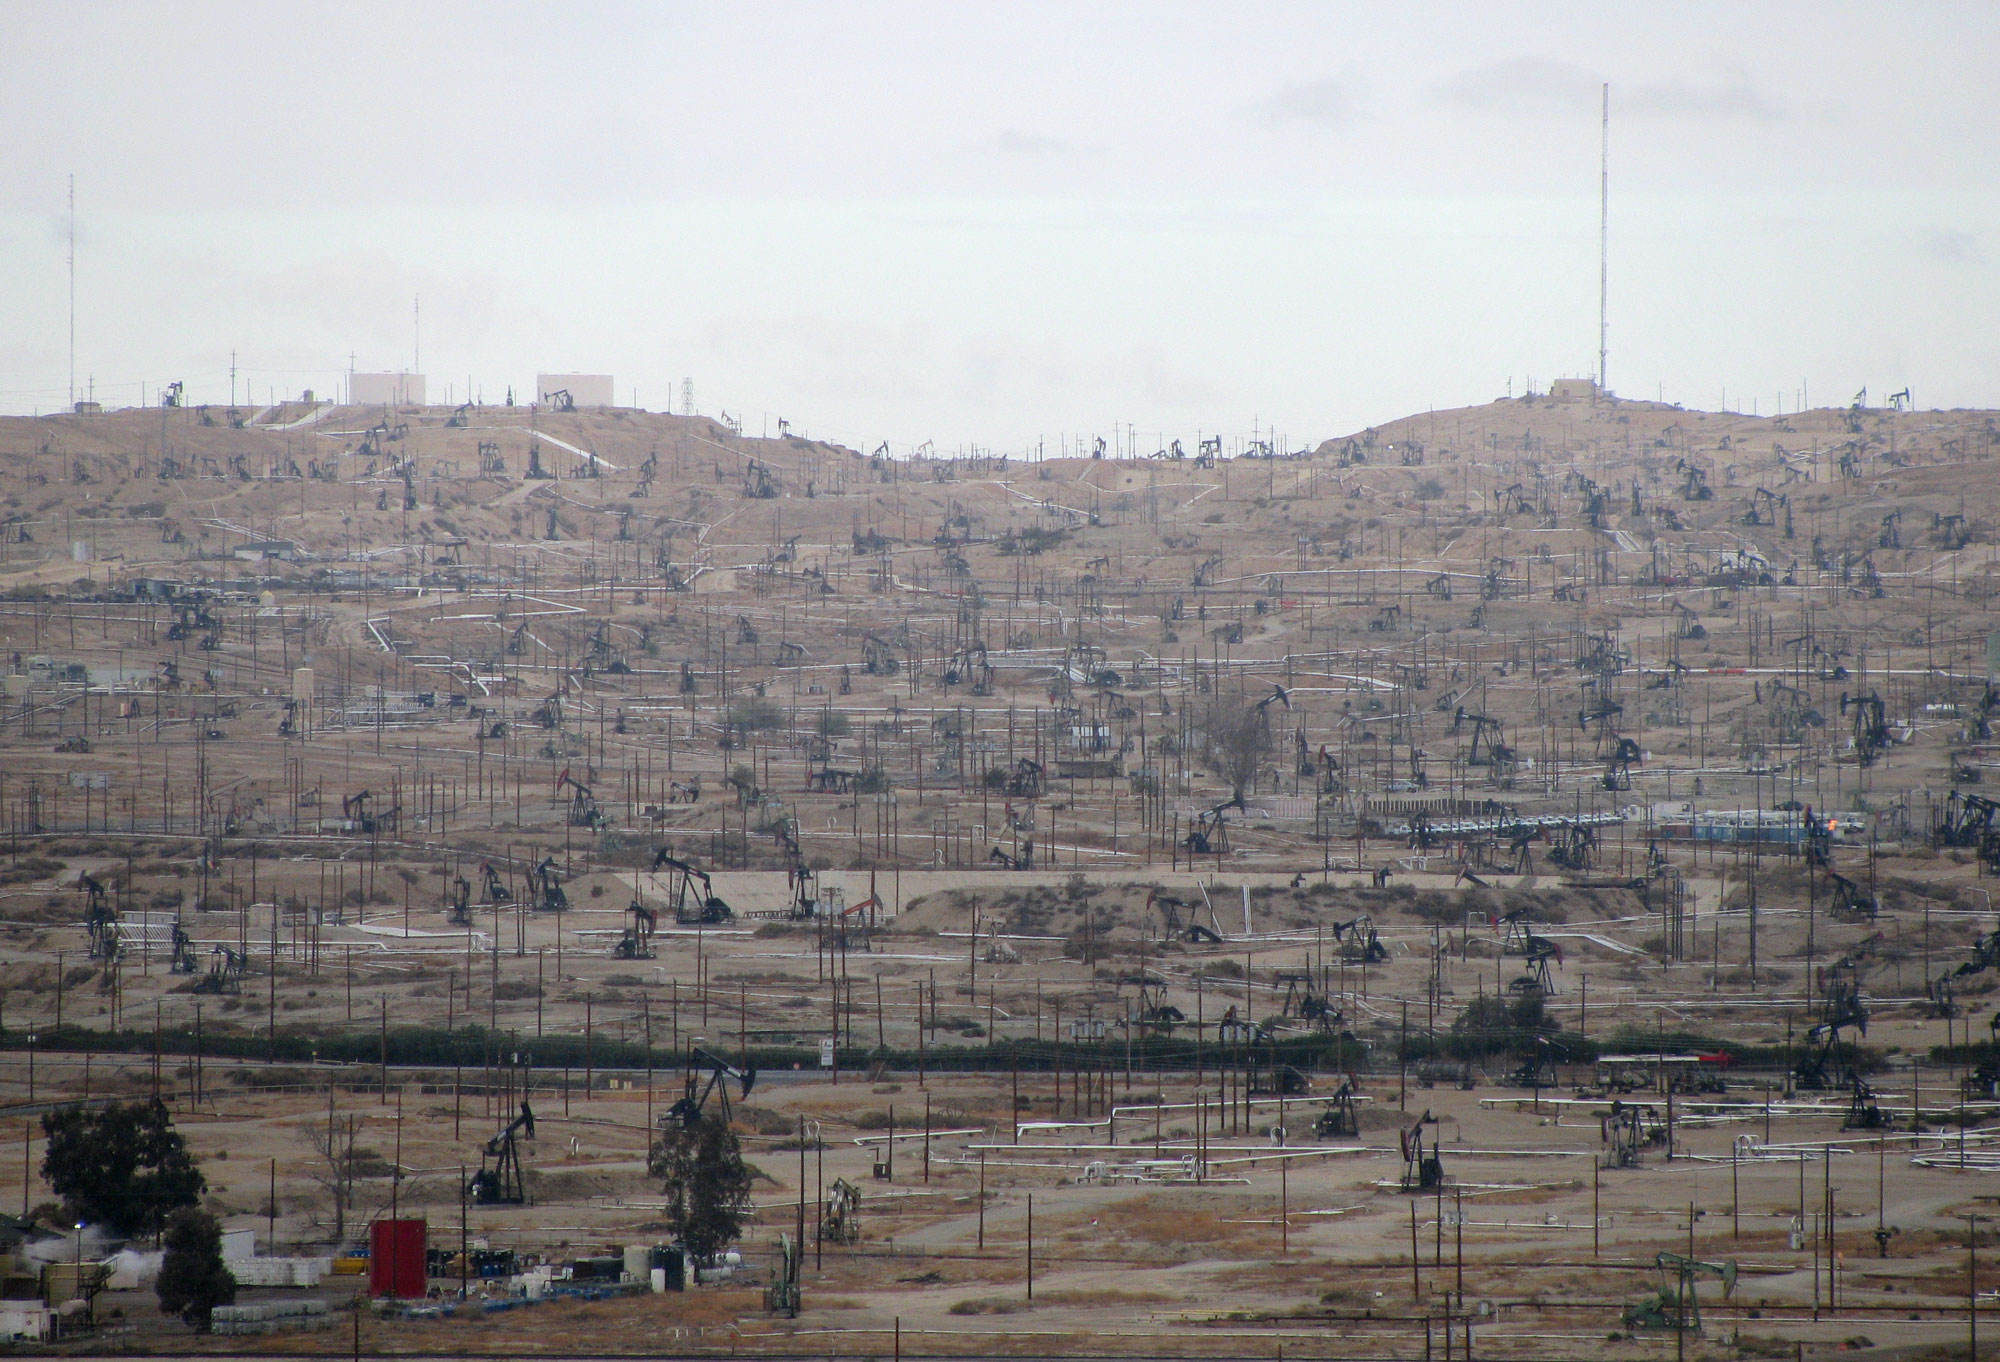 Photograph of the Kern River Oil Field in California taken at ground level. The photo shows a dry landscape heavily dotted with pumpjacks, power poles, and other structures related to petroleum extraction. 